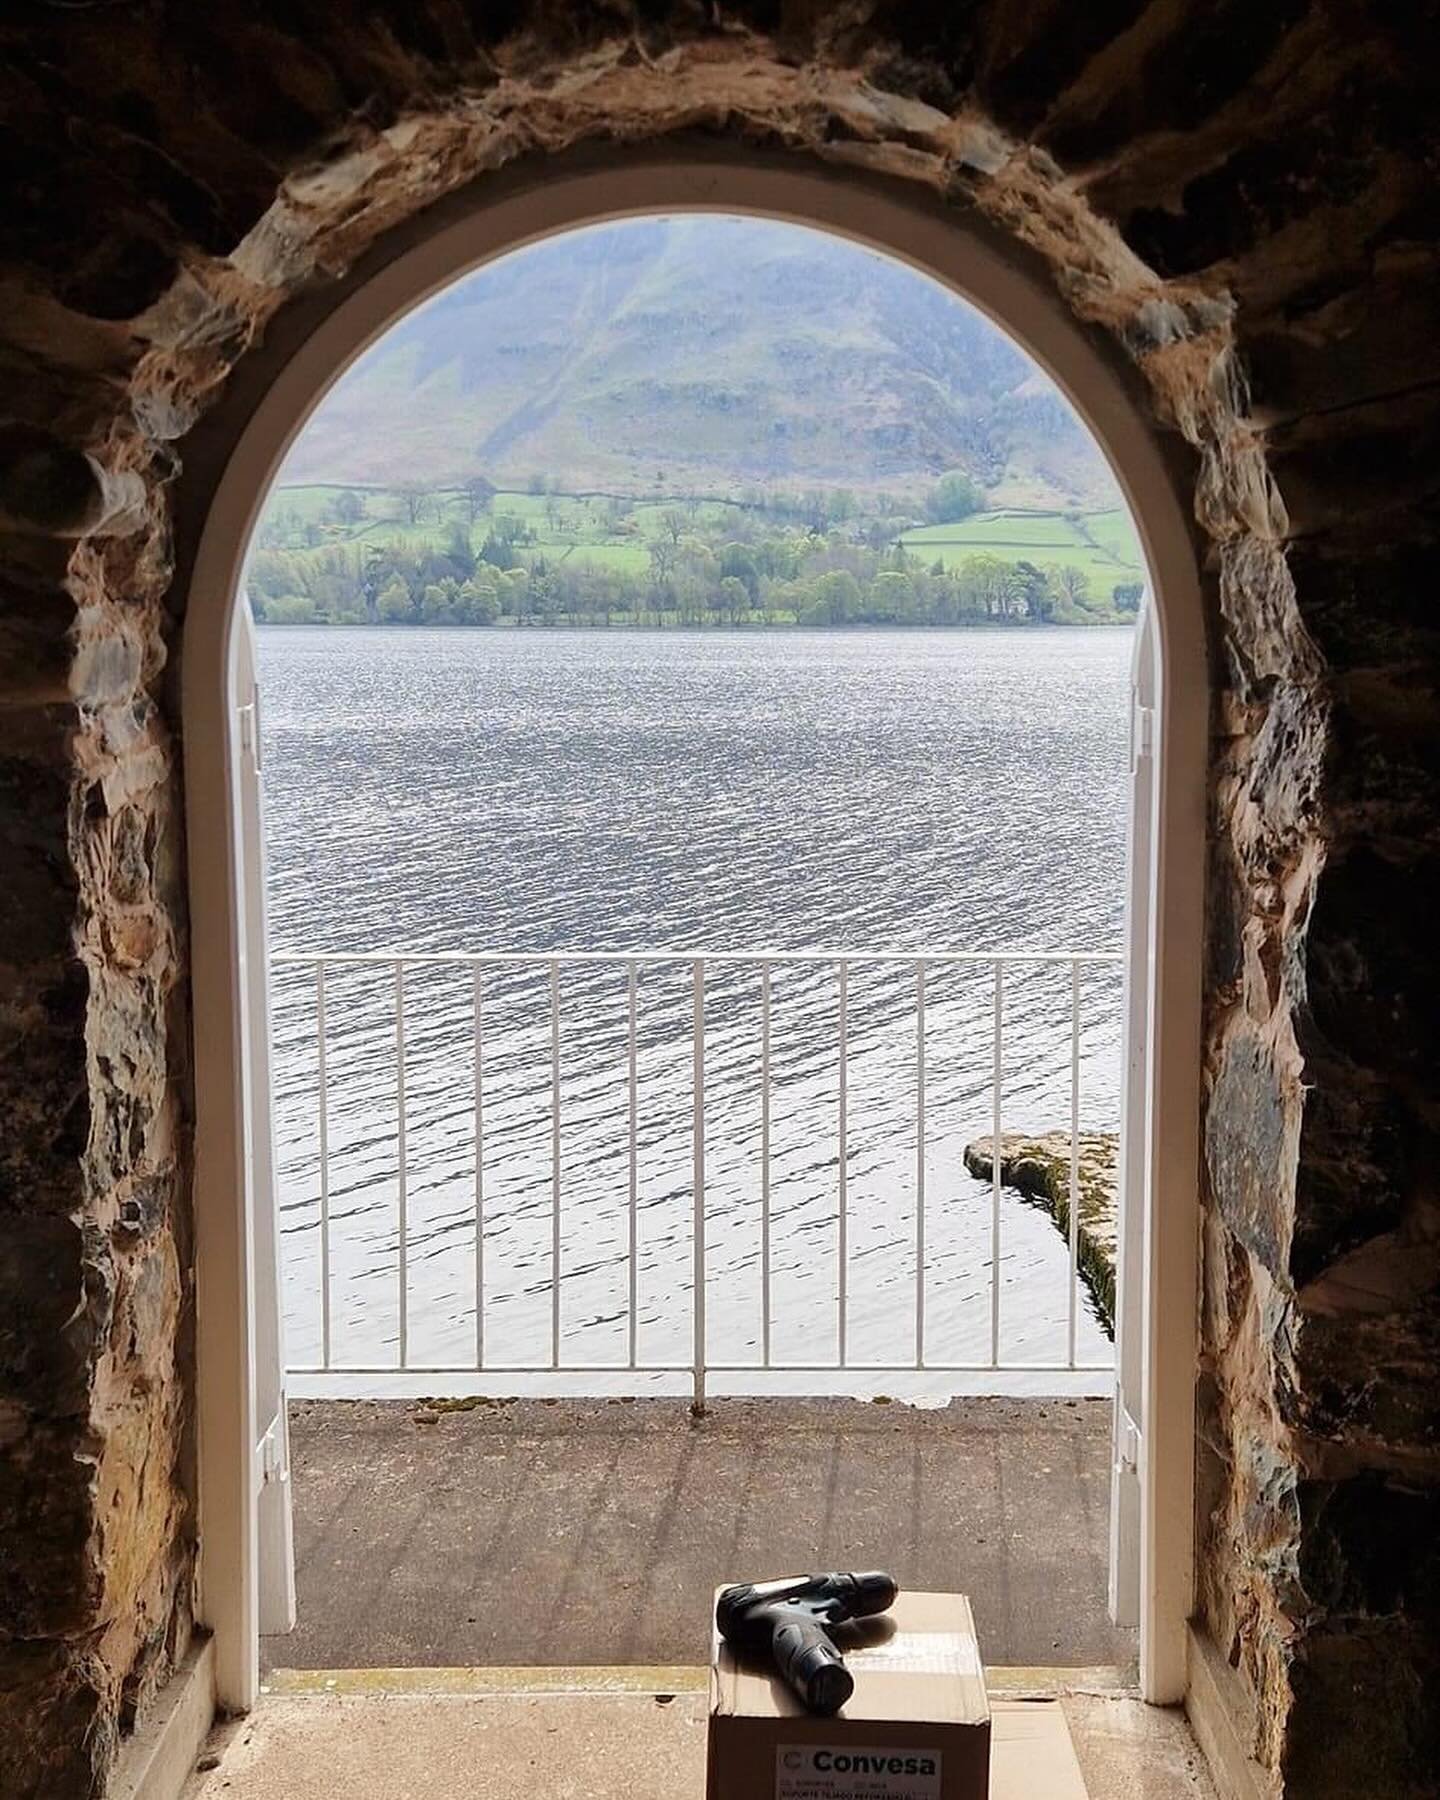 Now that&rsquo;s a view from the office 💙 One of our lucky stove install teams had the pleasure of working in a boathouse by Ullswater today. 
#ullswater #lakedistrict